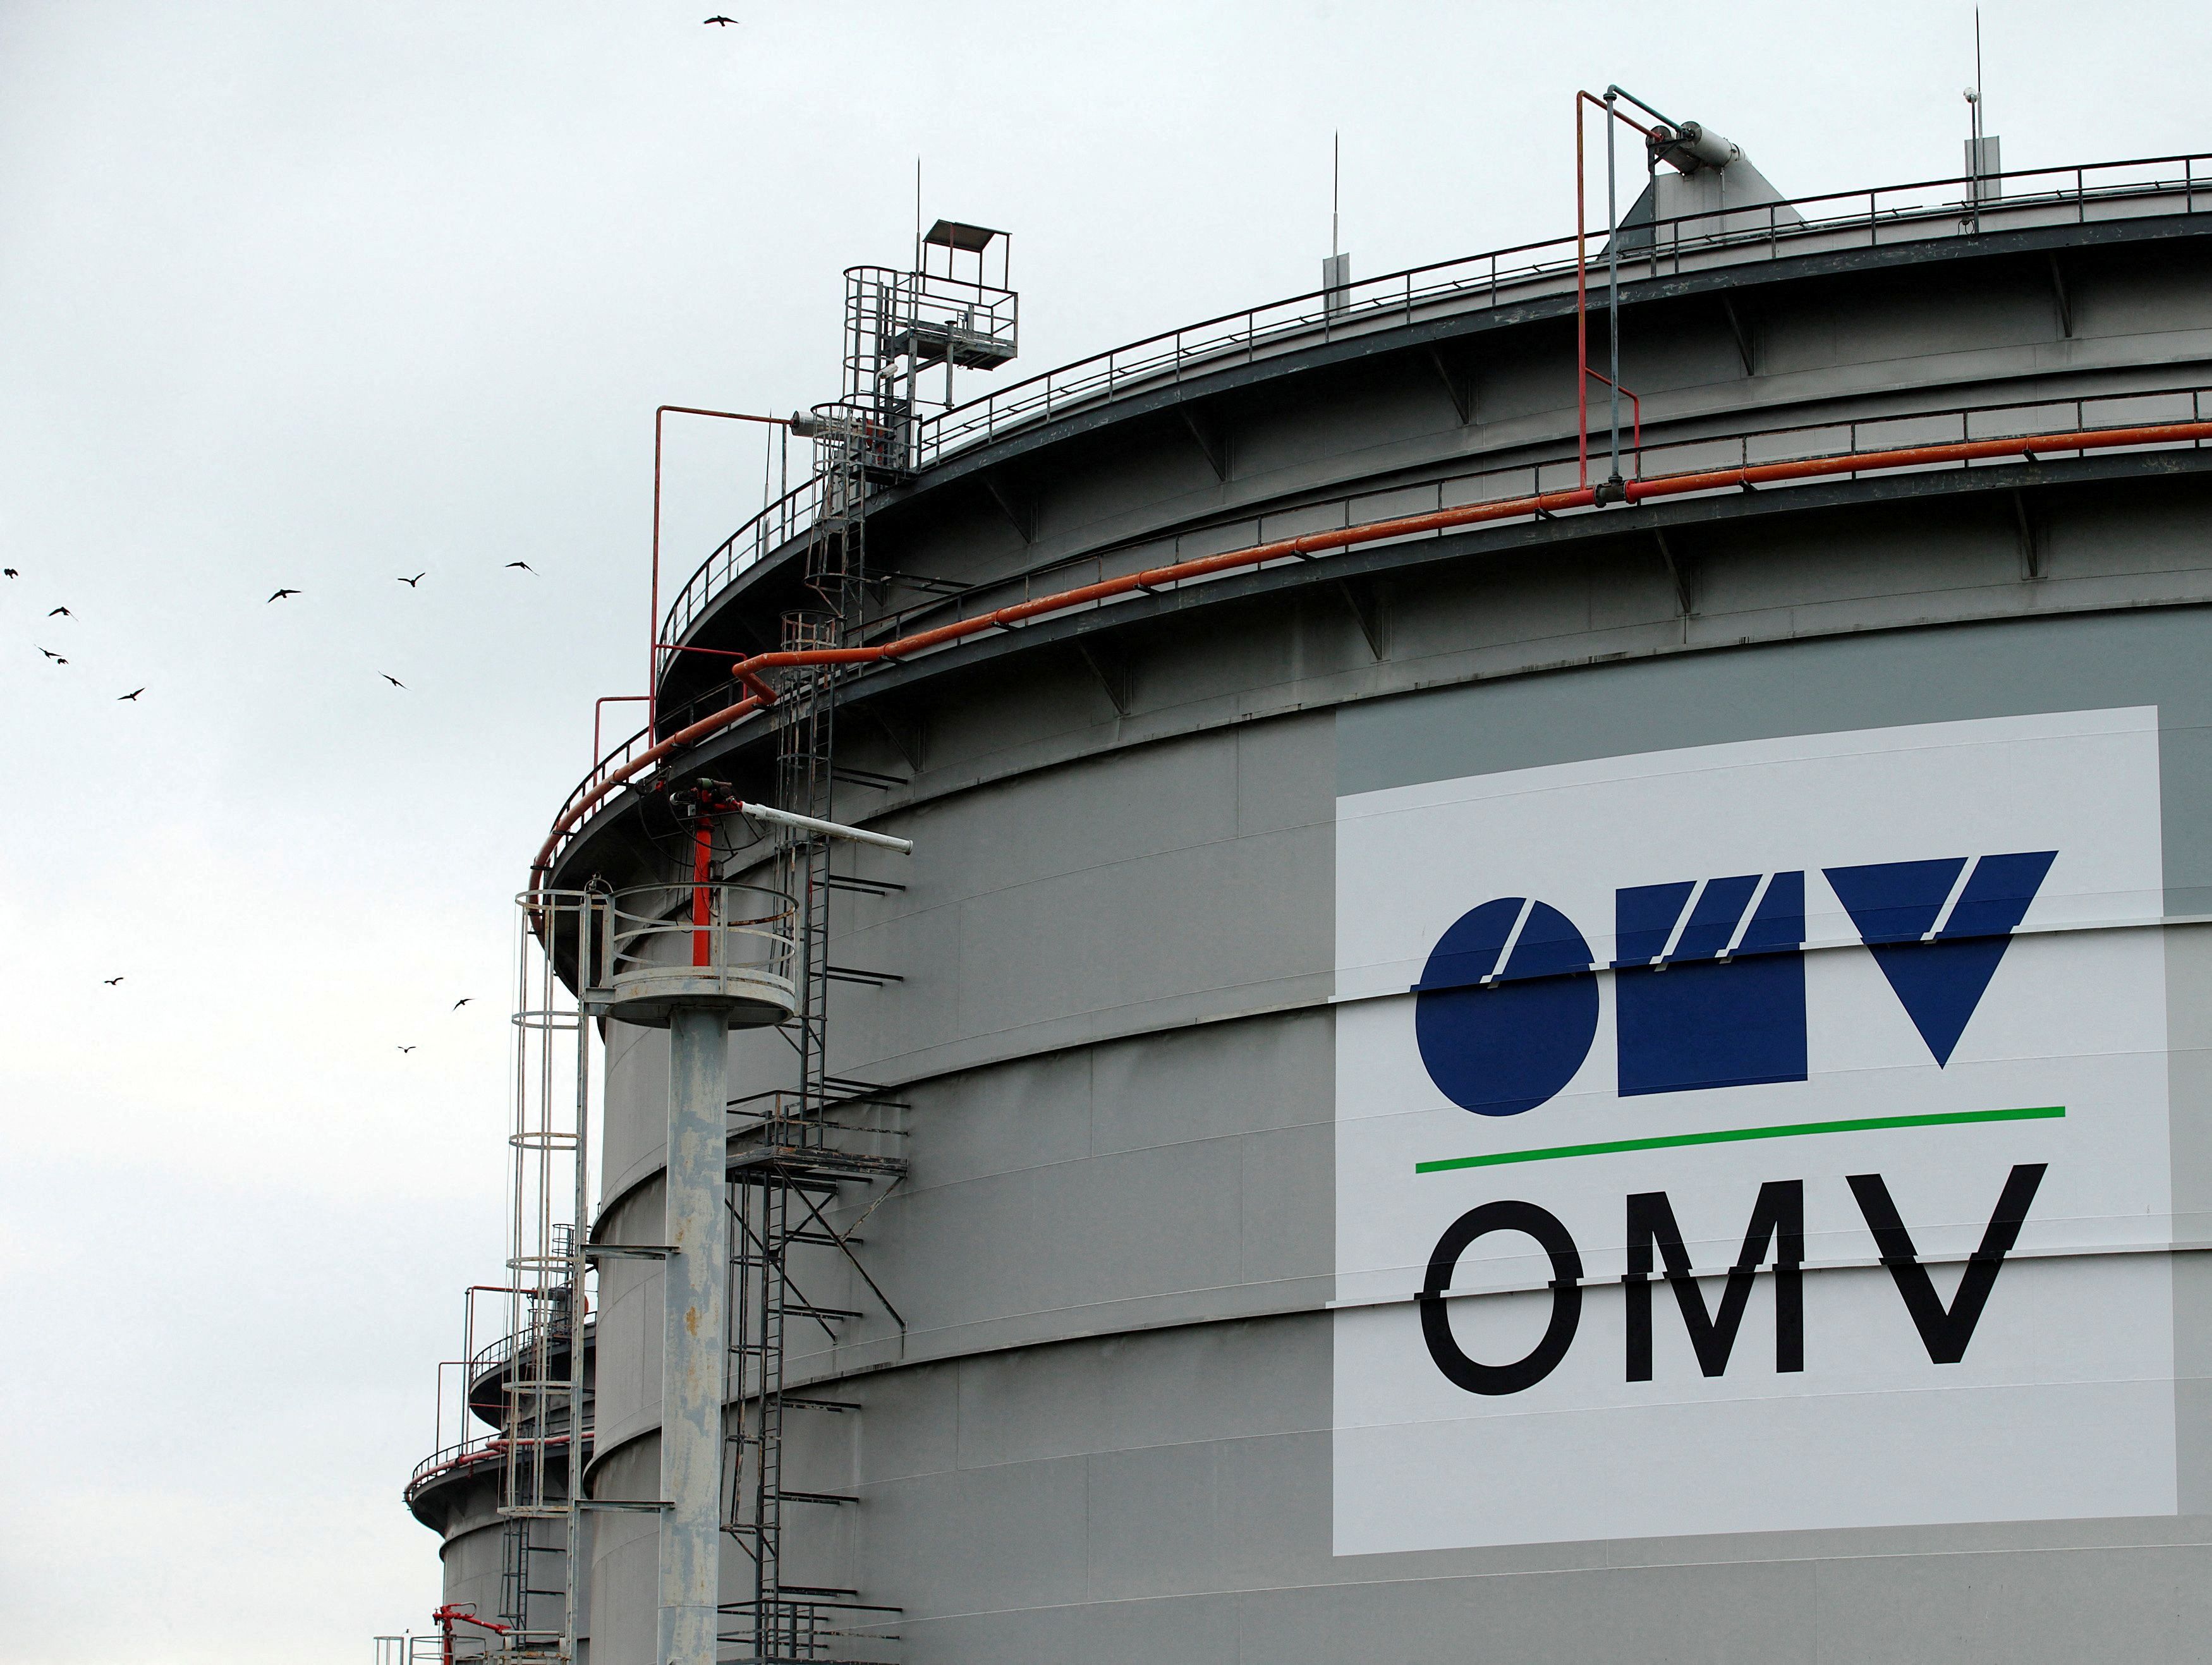 The logo of Austrian oil and gas group OMV is pictured on an oil tank at the refinery in Schwechat